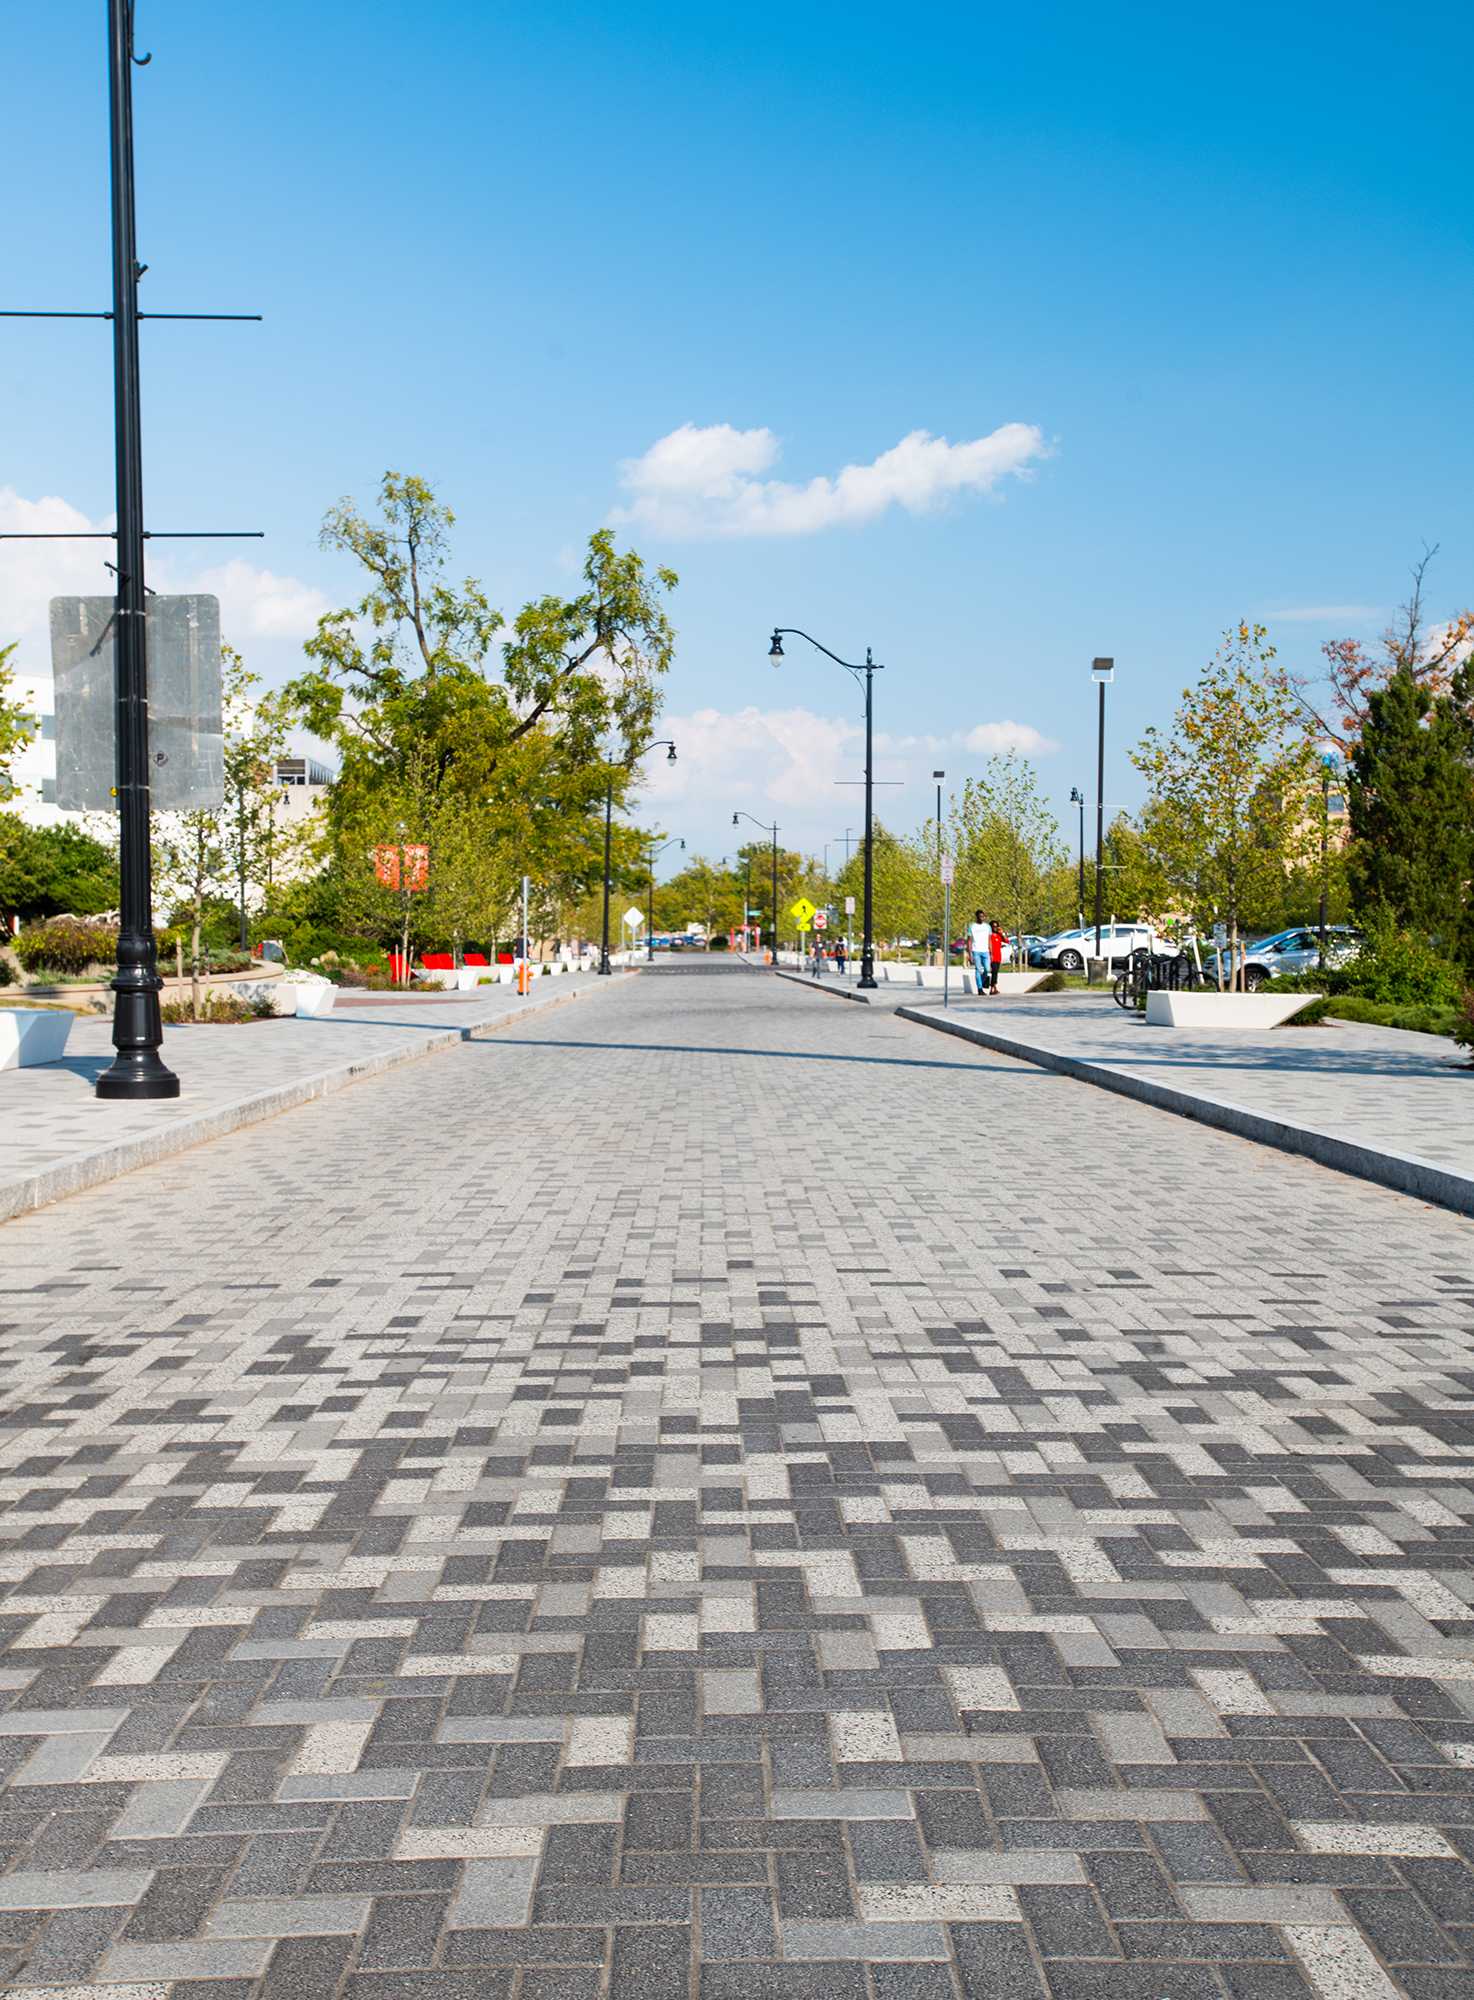 The pixelated design of Series pavers transitions to a singular color on both the street and sidewalk level heading out of the campus.